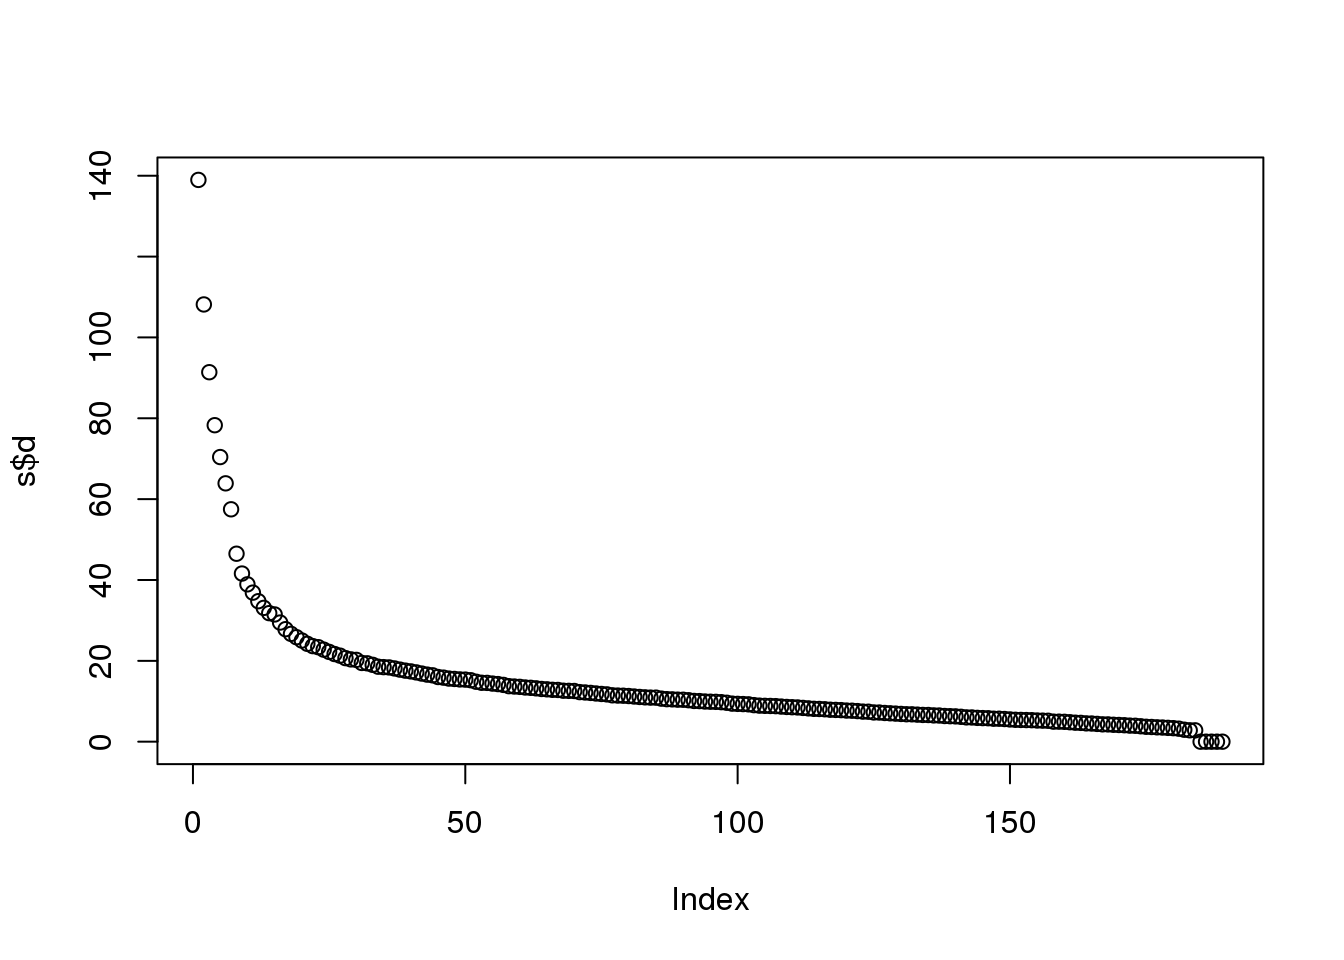 Entries of the diagonal of D for gene expression data.